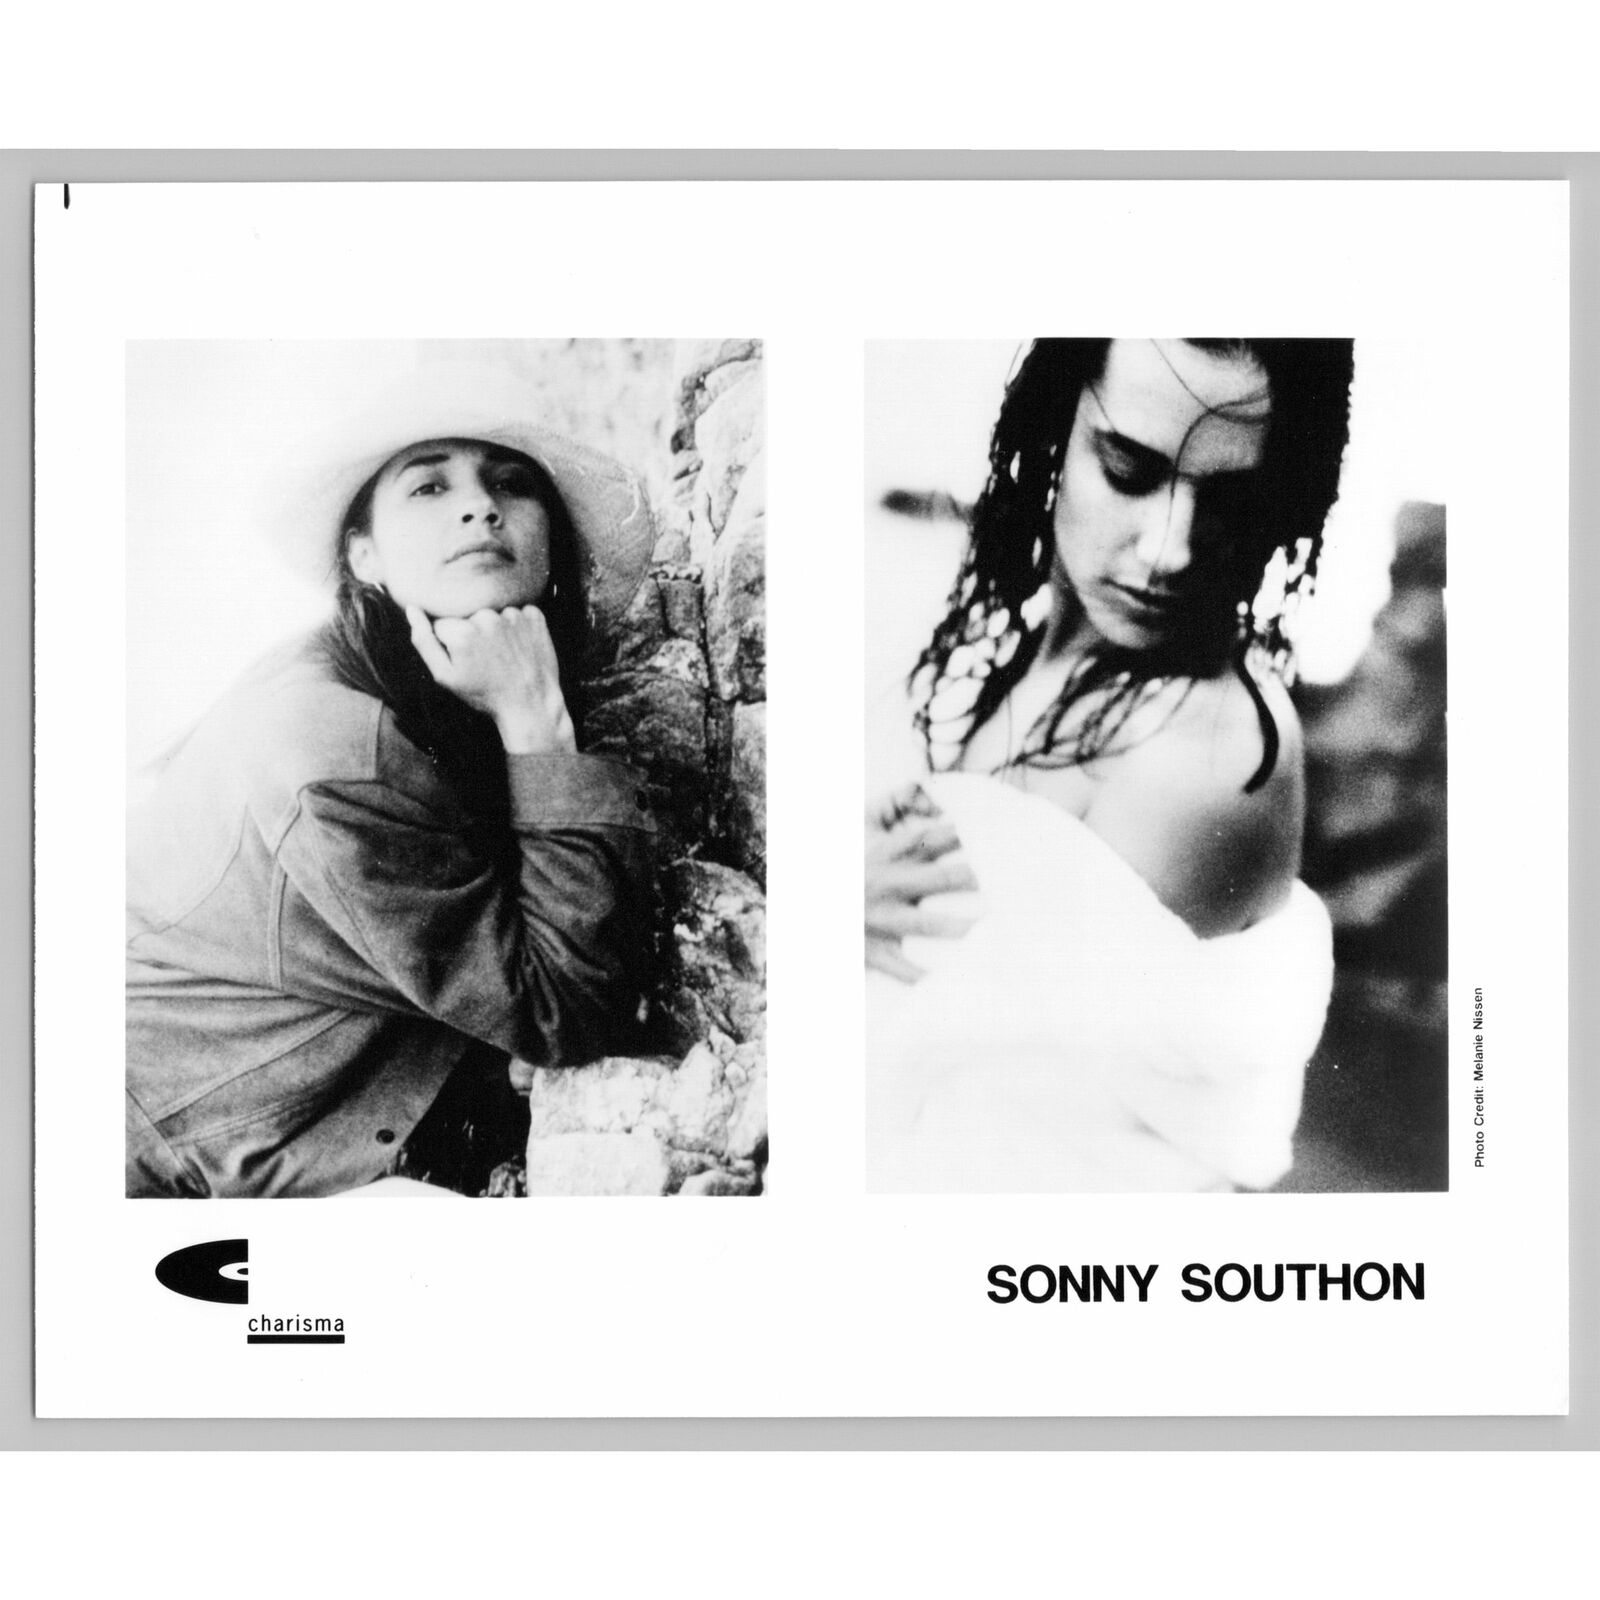 Sonny Southon New Zealand Singer Songwriter 80s-90s Glossy Music Press Photo